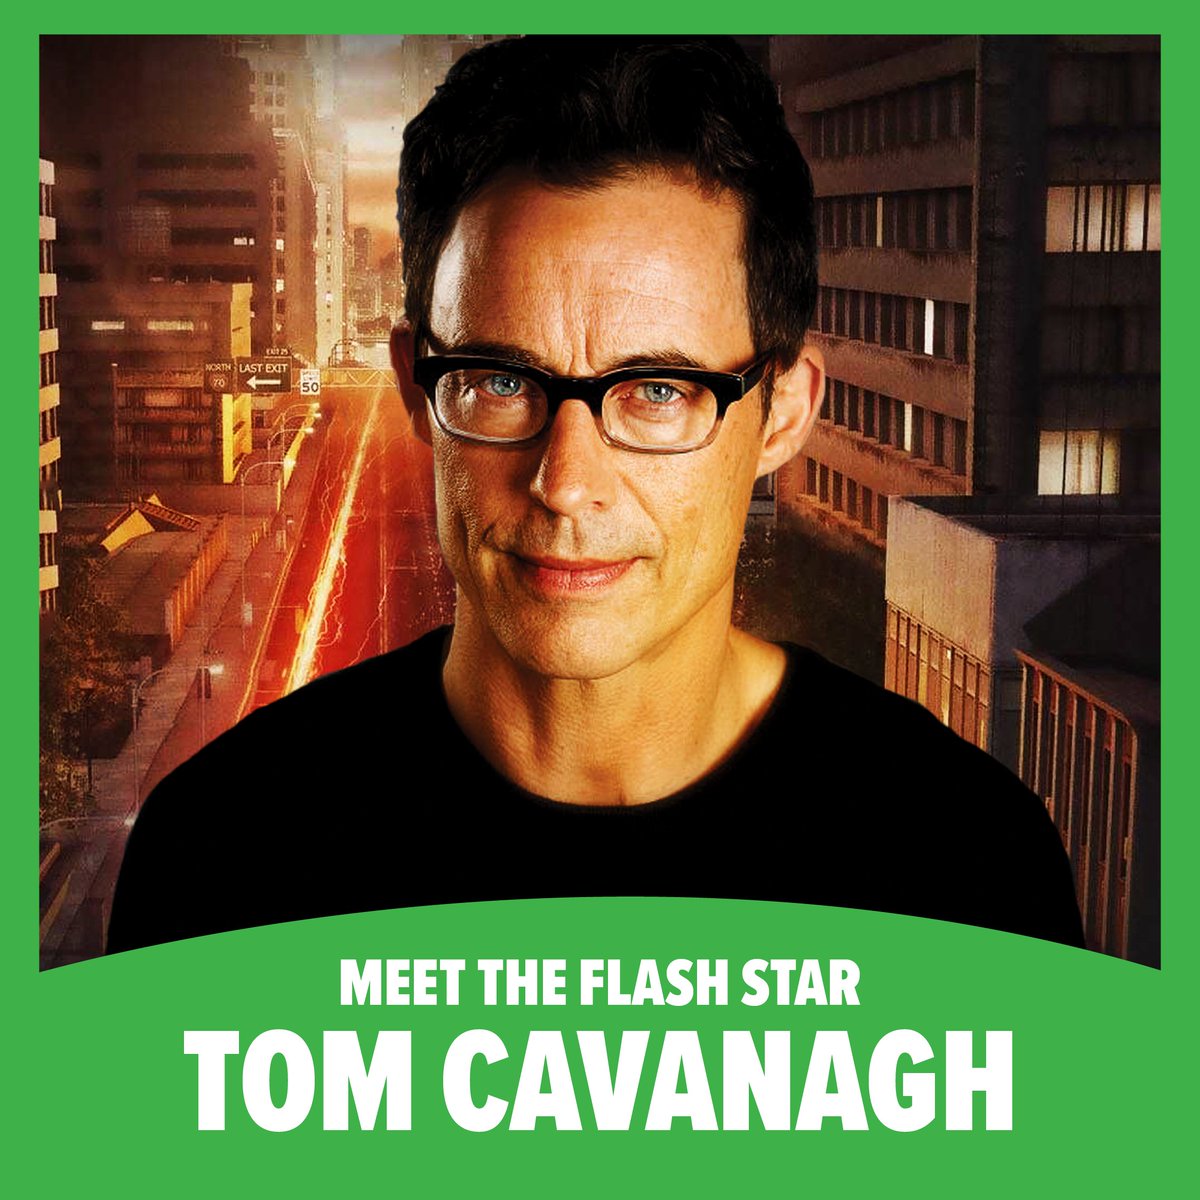 FAN EXPO Philadelphia will be here in a flash, and so will Dr. Harrison Wells. Get ready to meet @CavanaghTom from The Flash next month. Get your tickets today. spr.ly/6013wdSjl